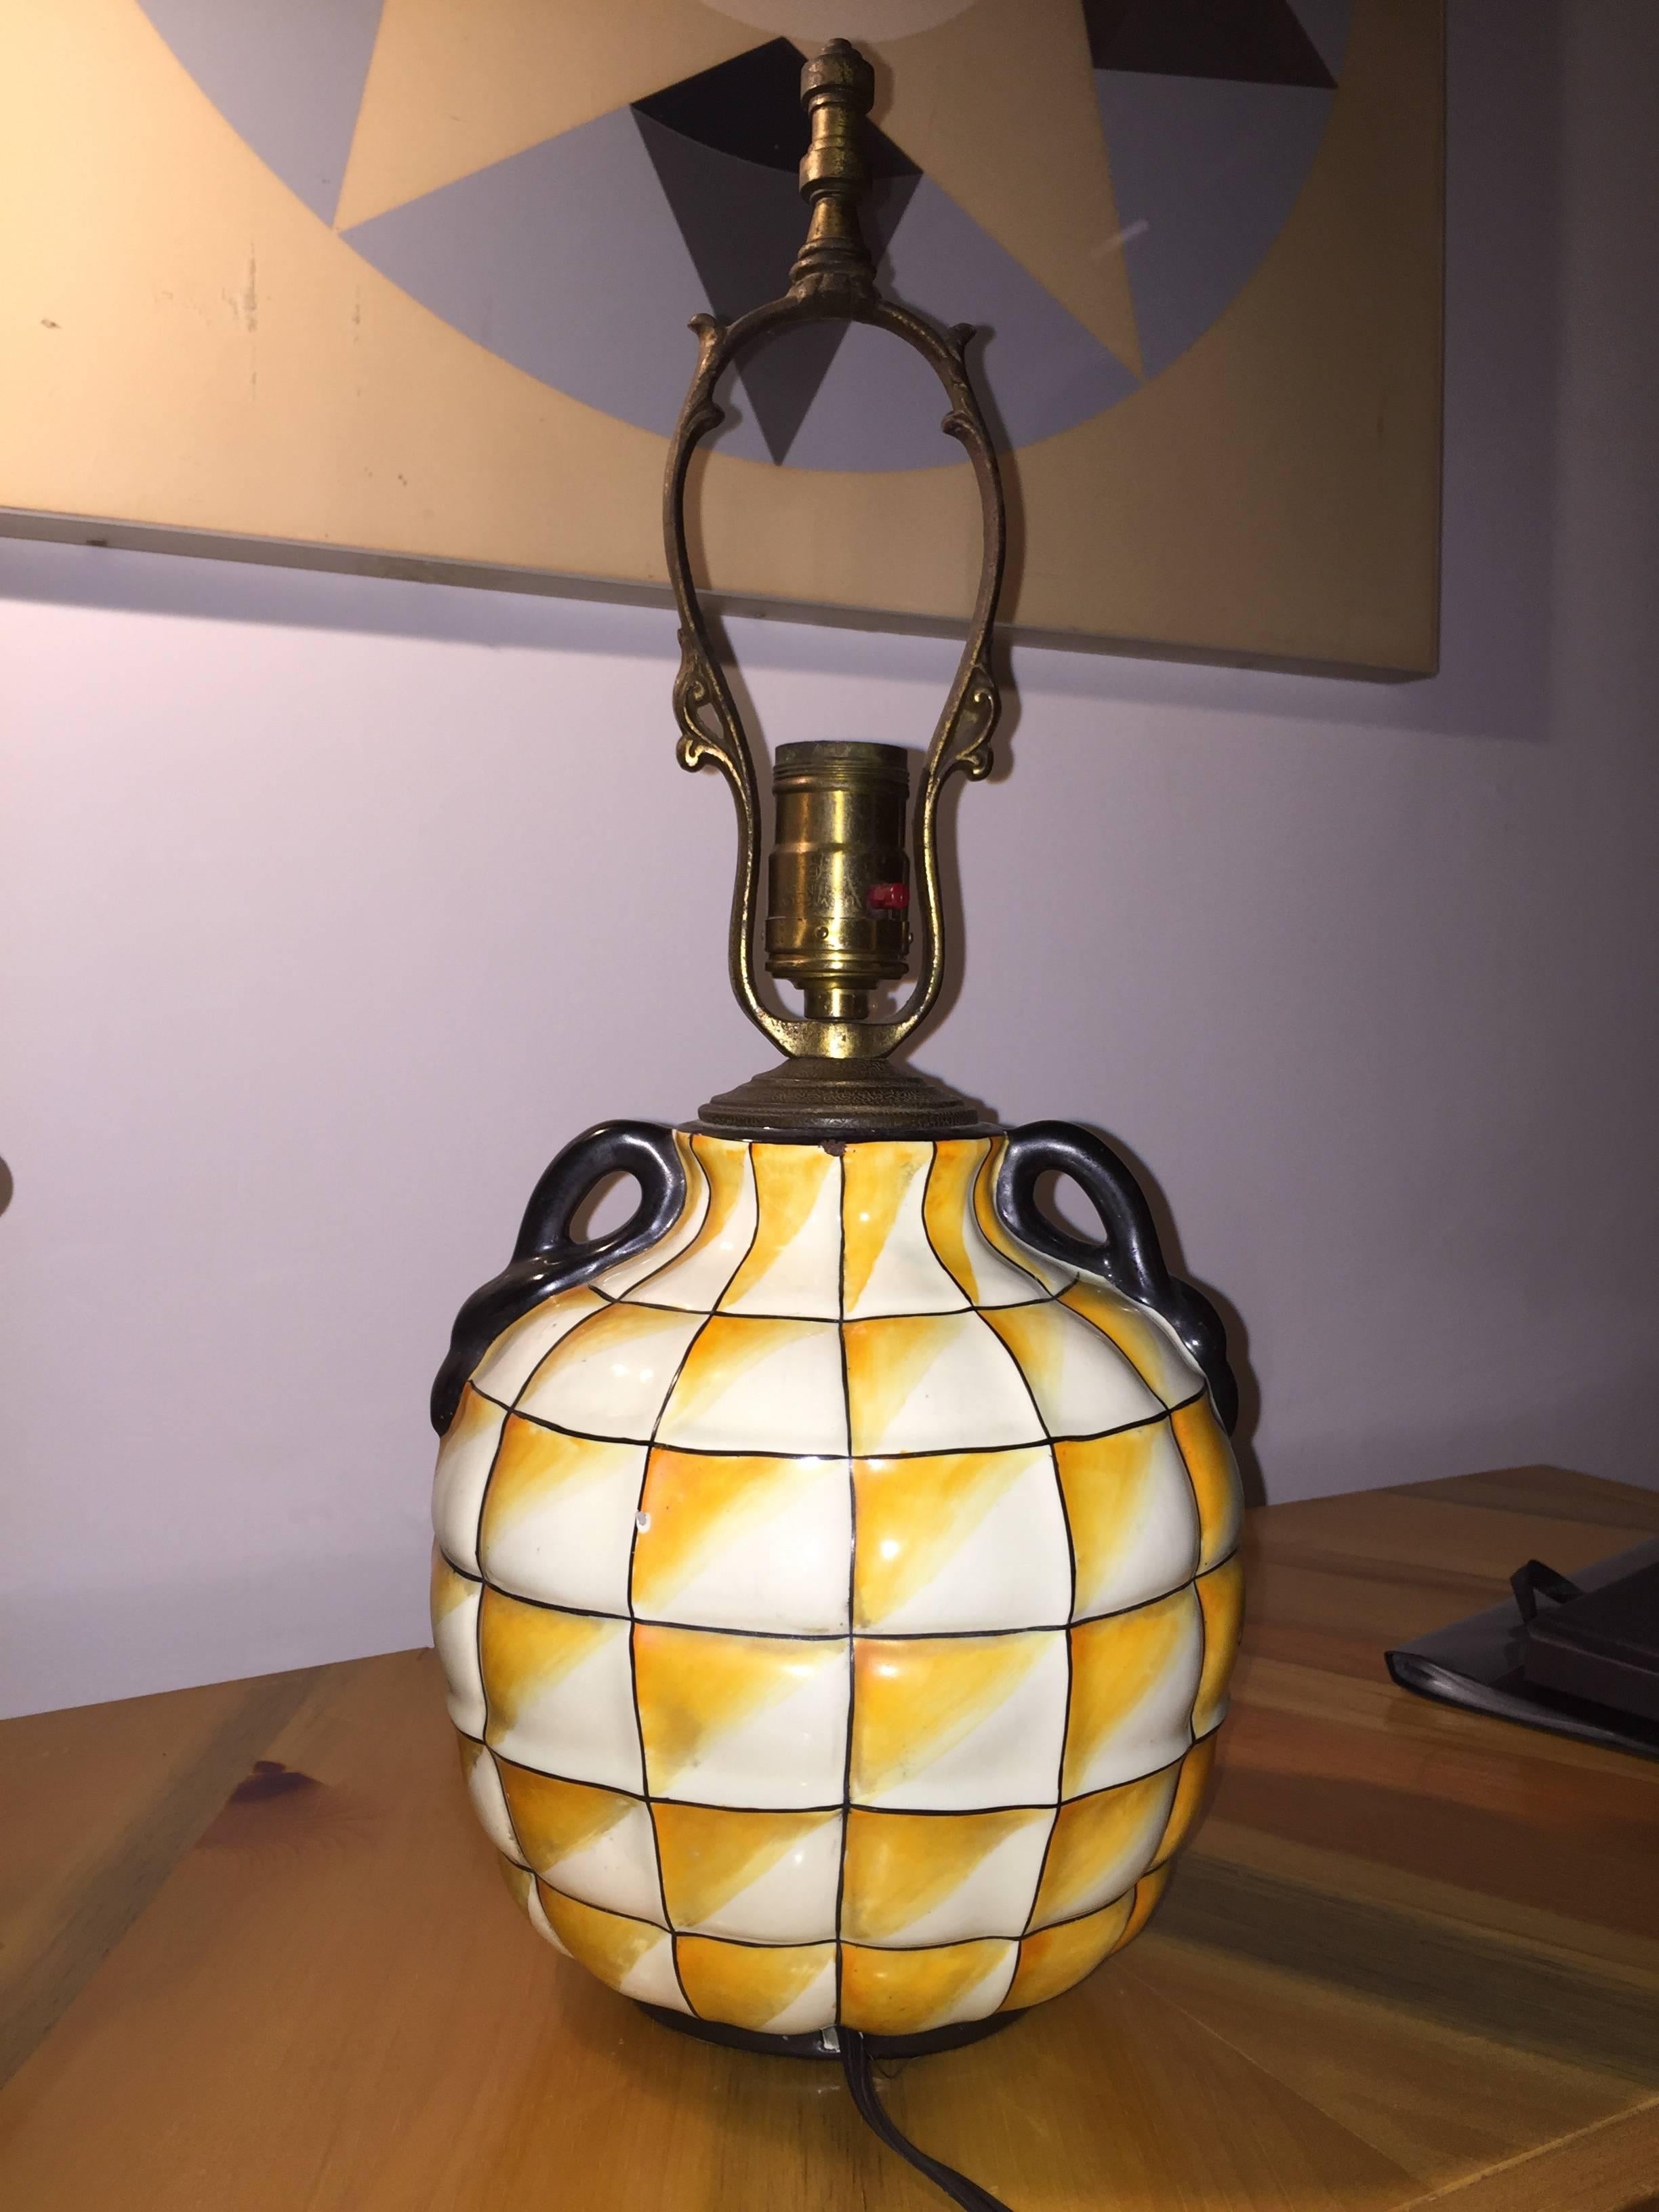 Fantastic pottery lamp with hand-painted opt-art gridded base with swan-form handles. The vase form is pictured in a 1928 issue of Art et Decor featuring Gio Ponti's designs for the Ginori factory. This example was cast as a lamp base, with molded